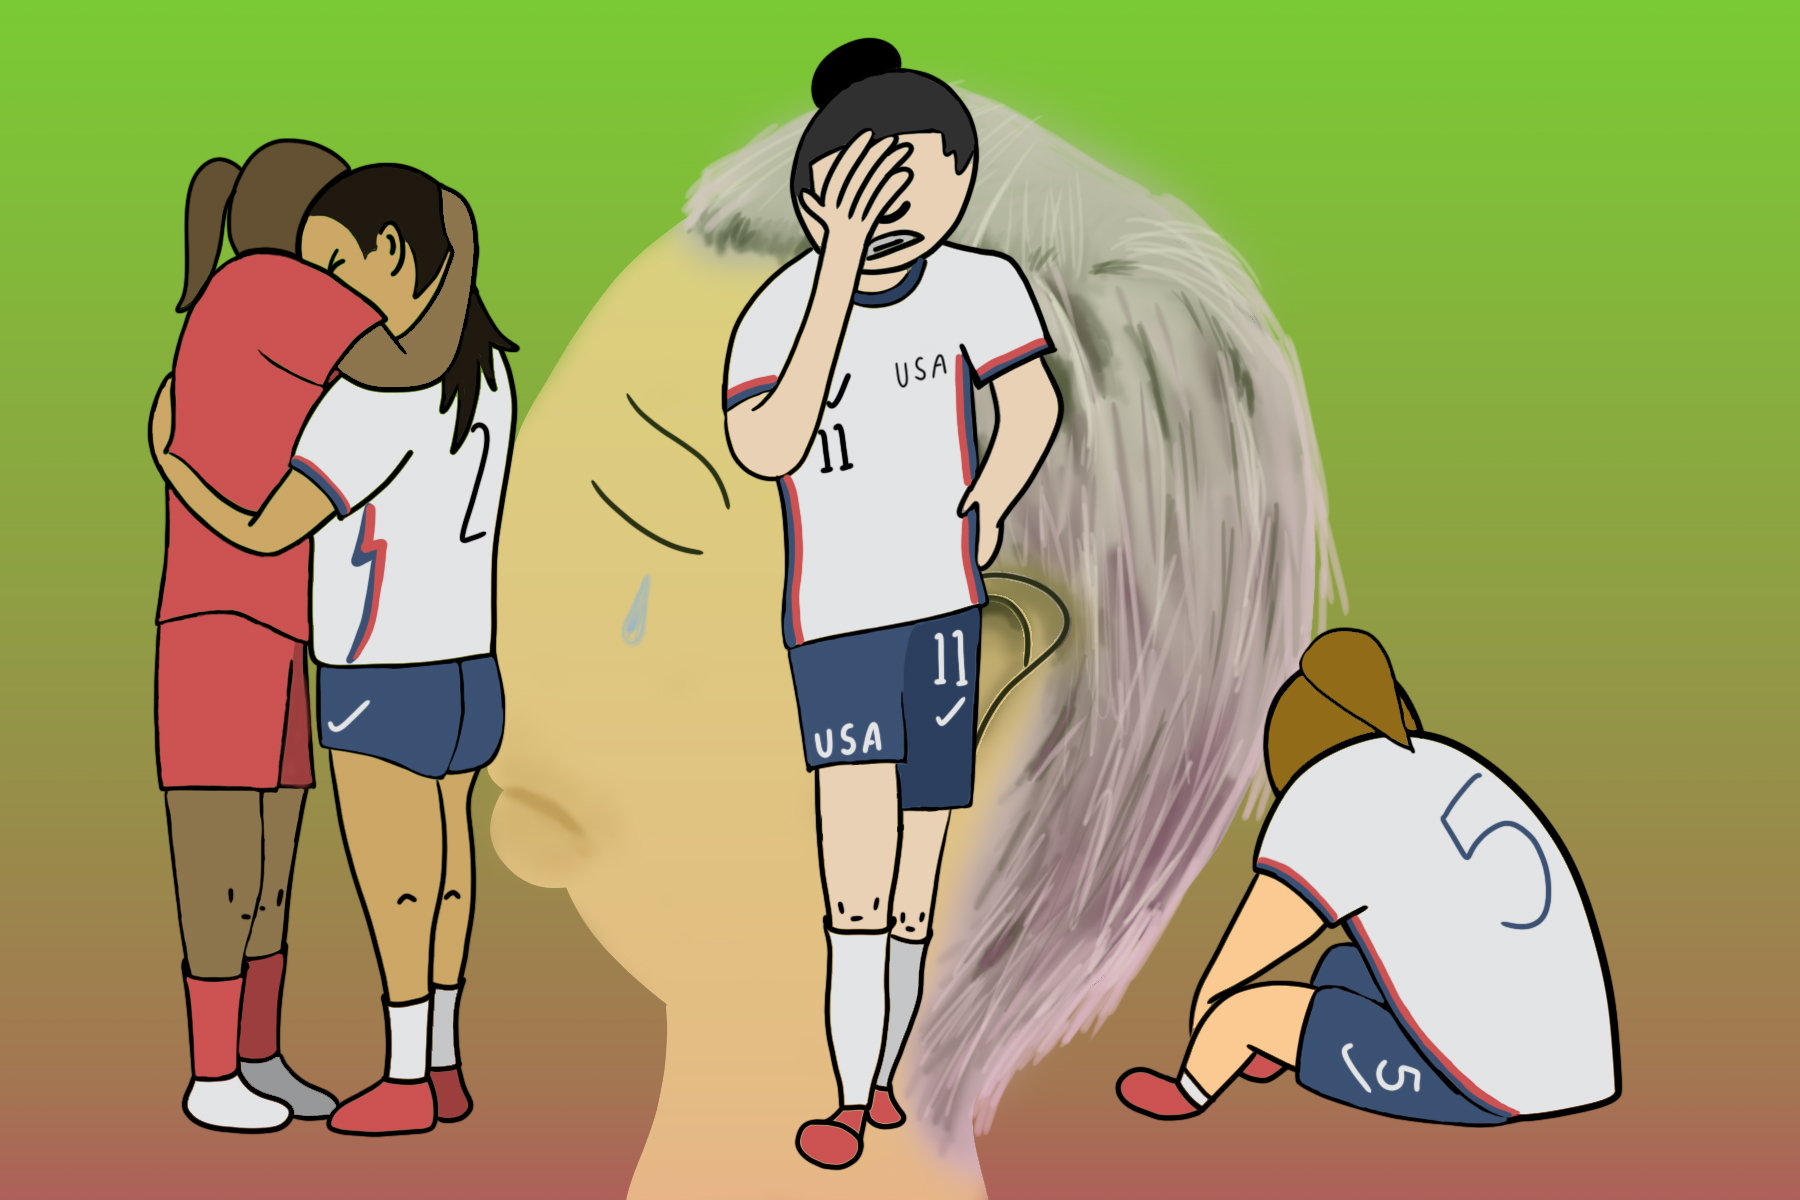 An illustration depicts USWNT players in distress over their loss at the 2021 Tokyo Olympics; they are pictured hugging, sitting on the ground in defeat and crying.